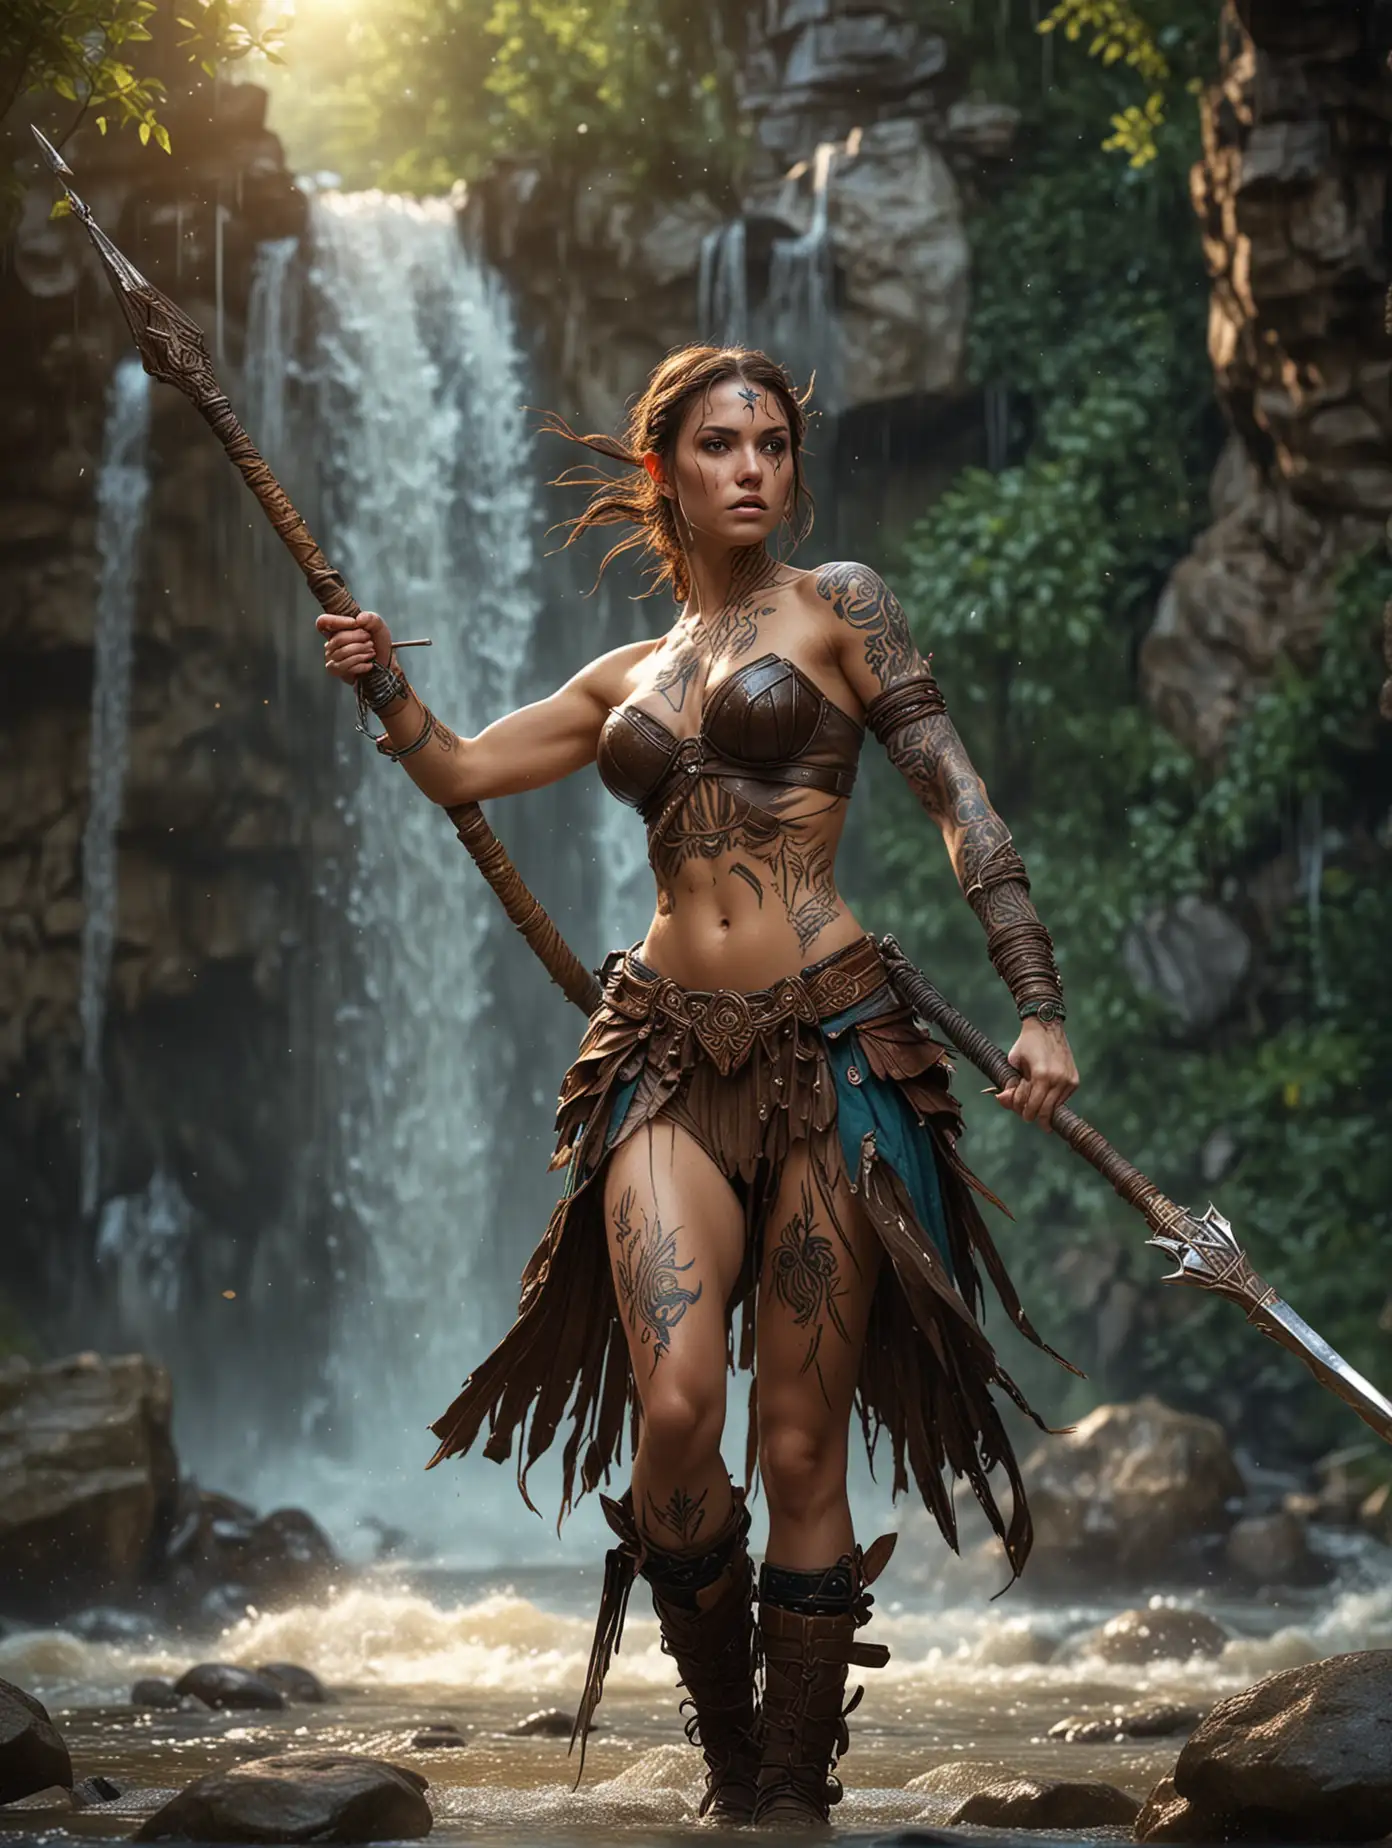 Whimsical, create an image of a beauty european girl, brunette hair, adorned skin with tattoos, in dynamic fight pose, holding a spear, cosplaying as amazon warrior character. Waterfall in riverside background. Fantasy theme, colorful organic shape, dramatic lighting, hyper-detailed, ultra HD.